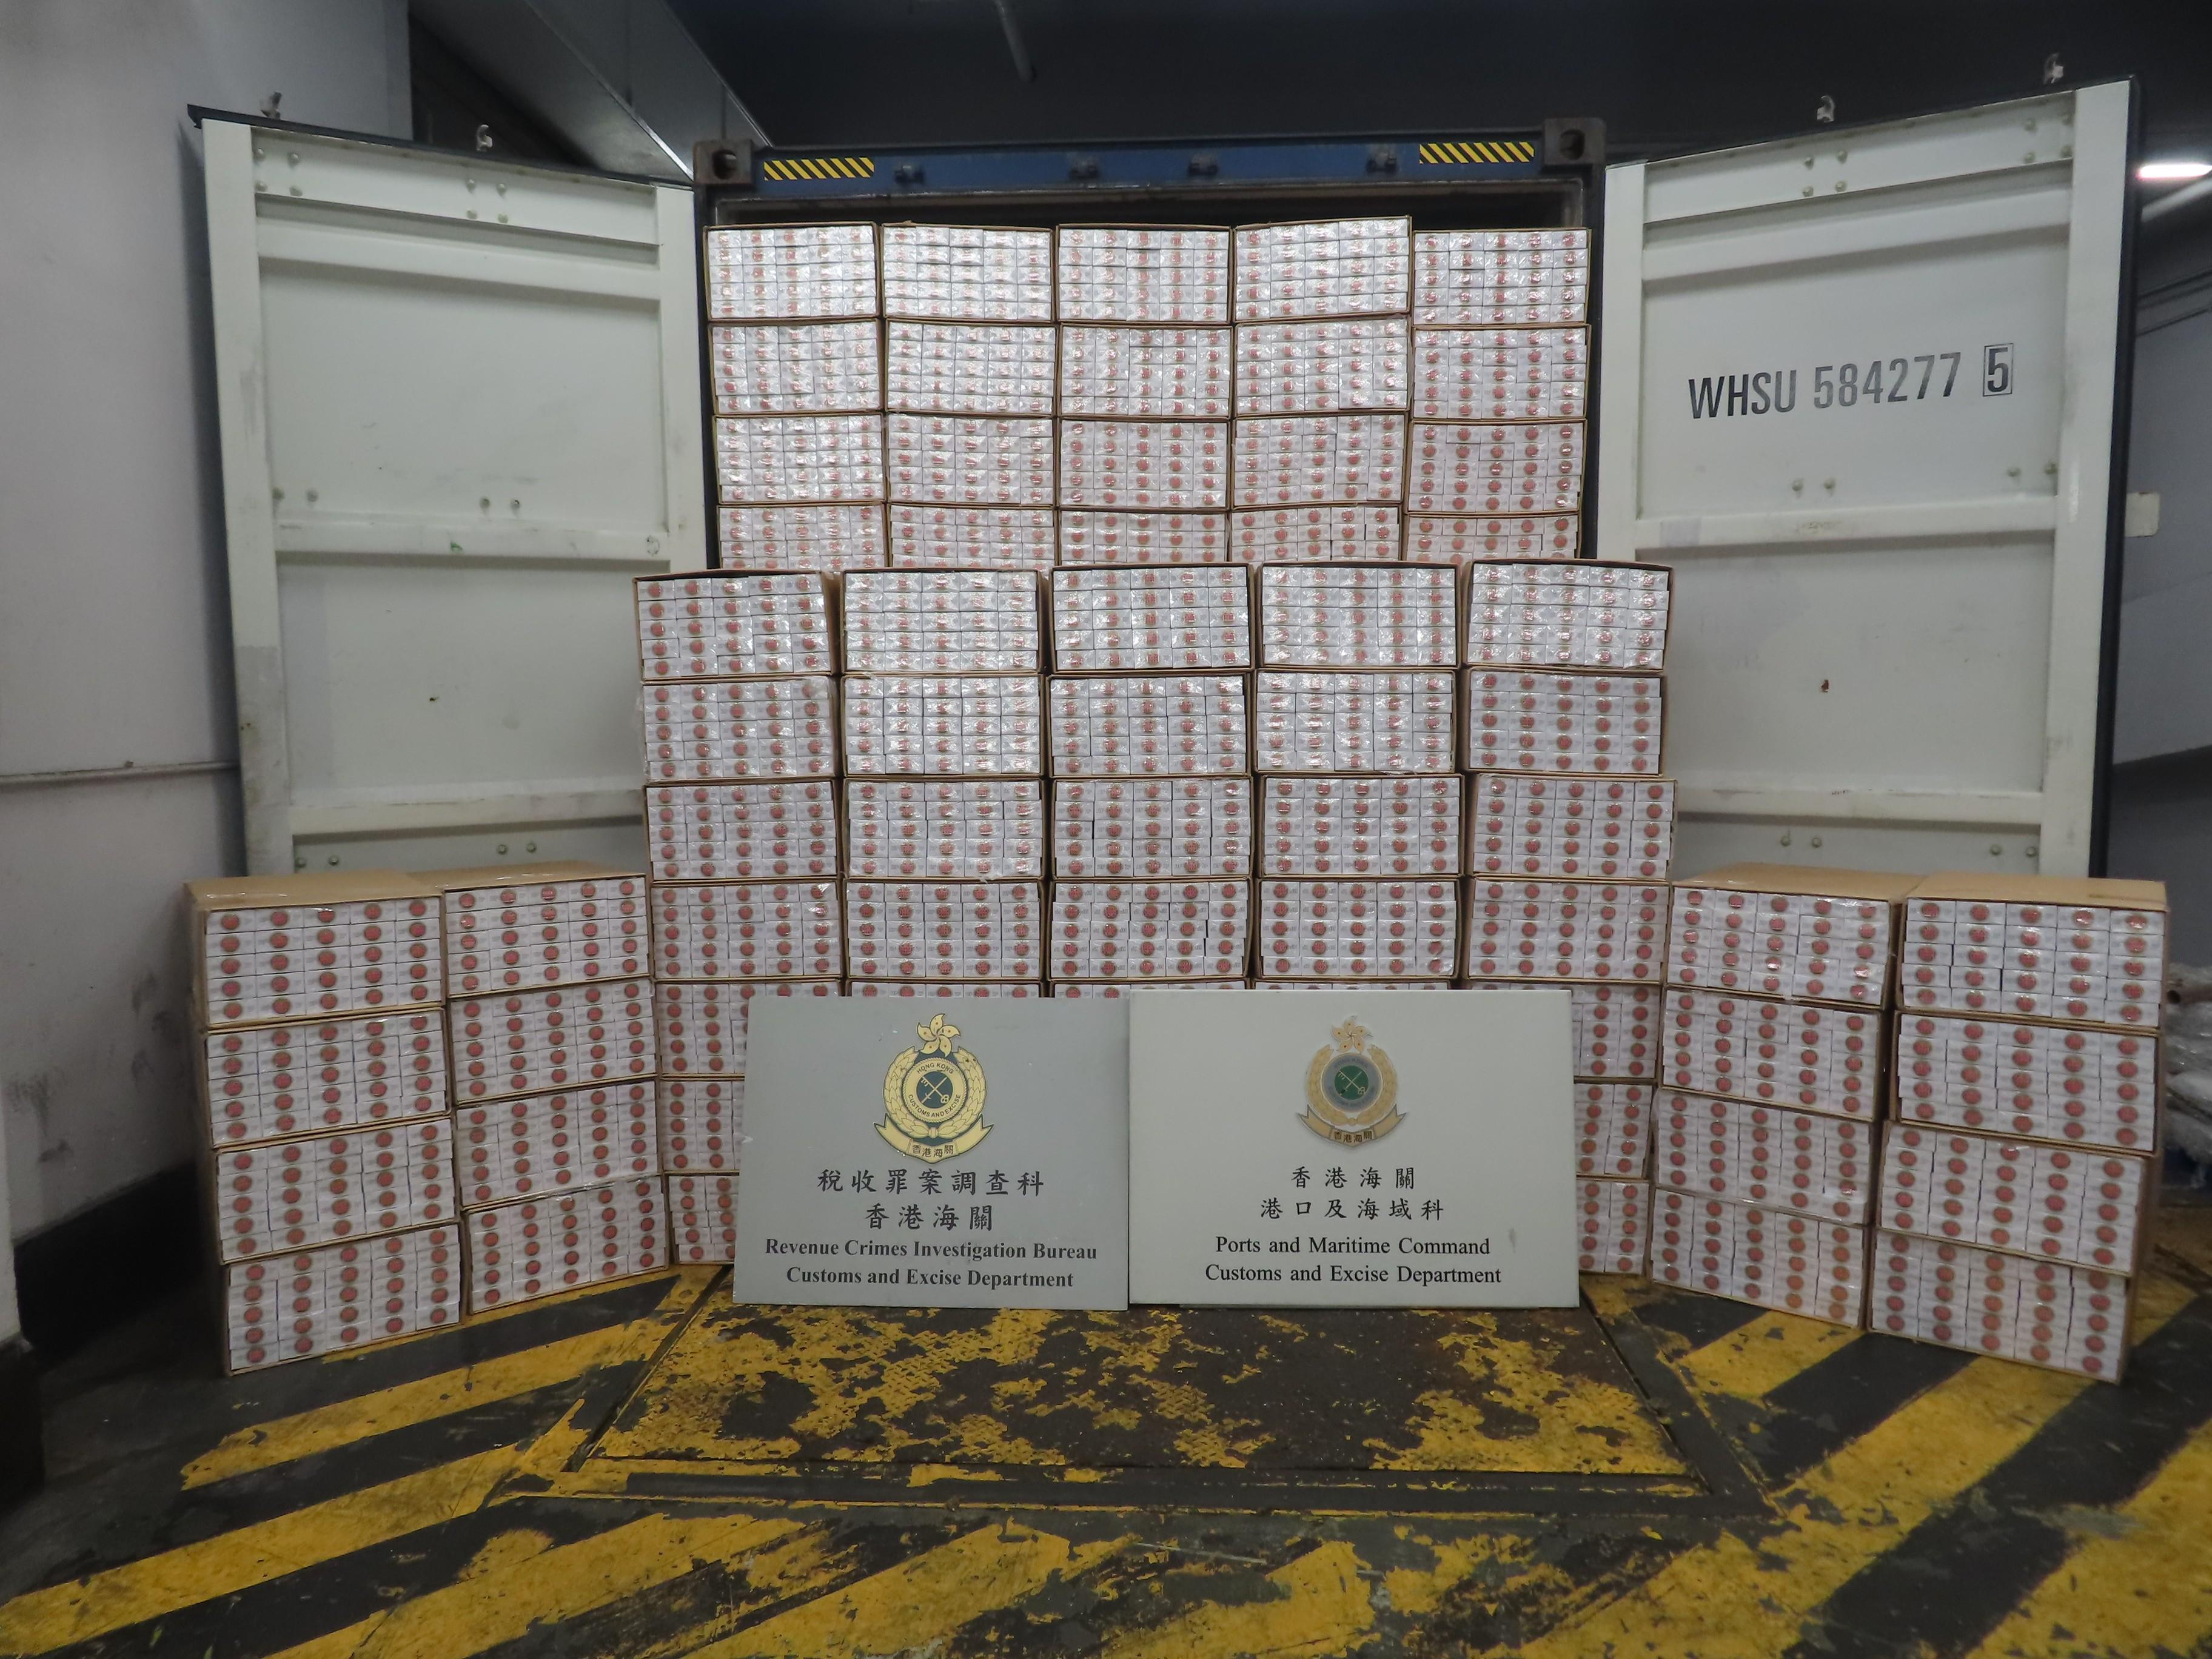 Hong Kong Customs on April 30 selected and inspected a 40-foot container, arriving from Japan to Hong Kong and declared as carrying cosmetic products, at the Kwai Chung Customhouse Cargo Examination Compound. Upon inspection, Customs officers seized 2 million suspected illicit cigarettes inside the container. Photo shows the suspected illicit cigarettes seized.